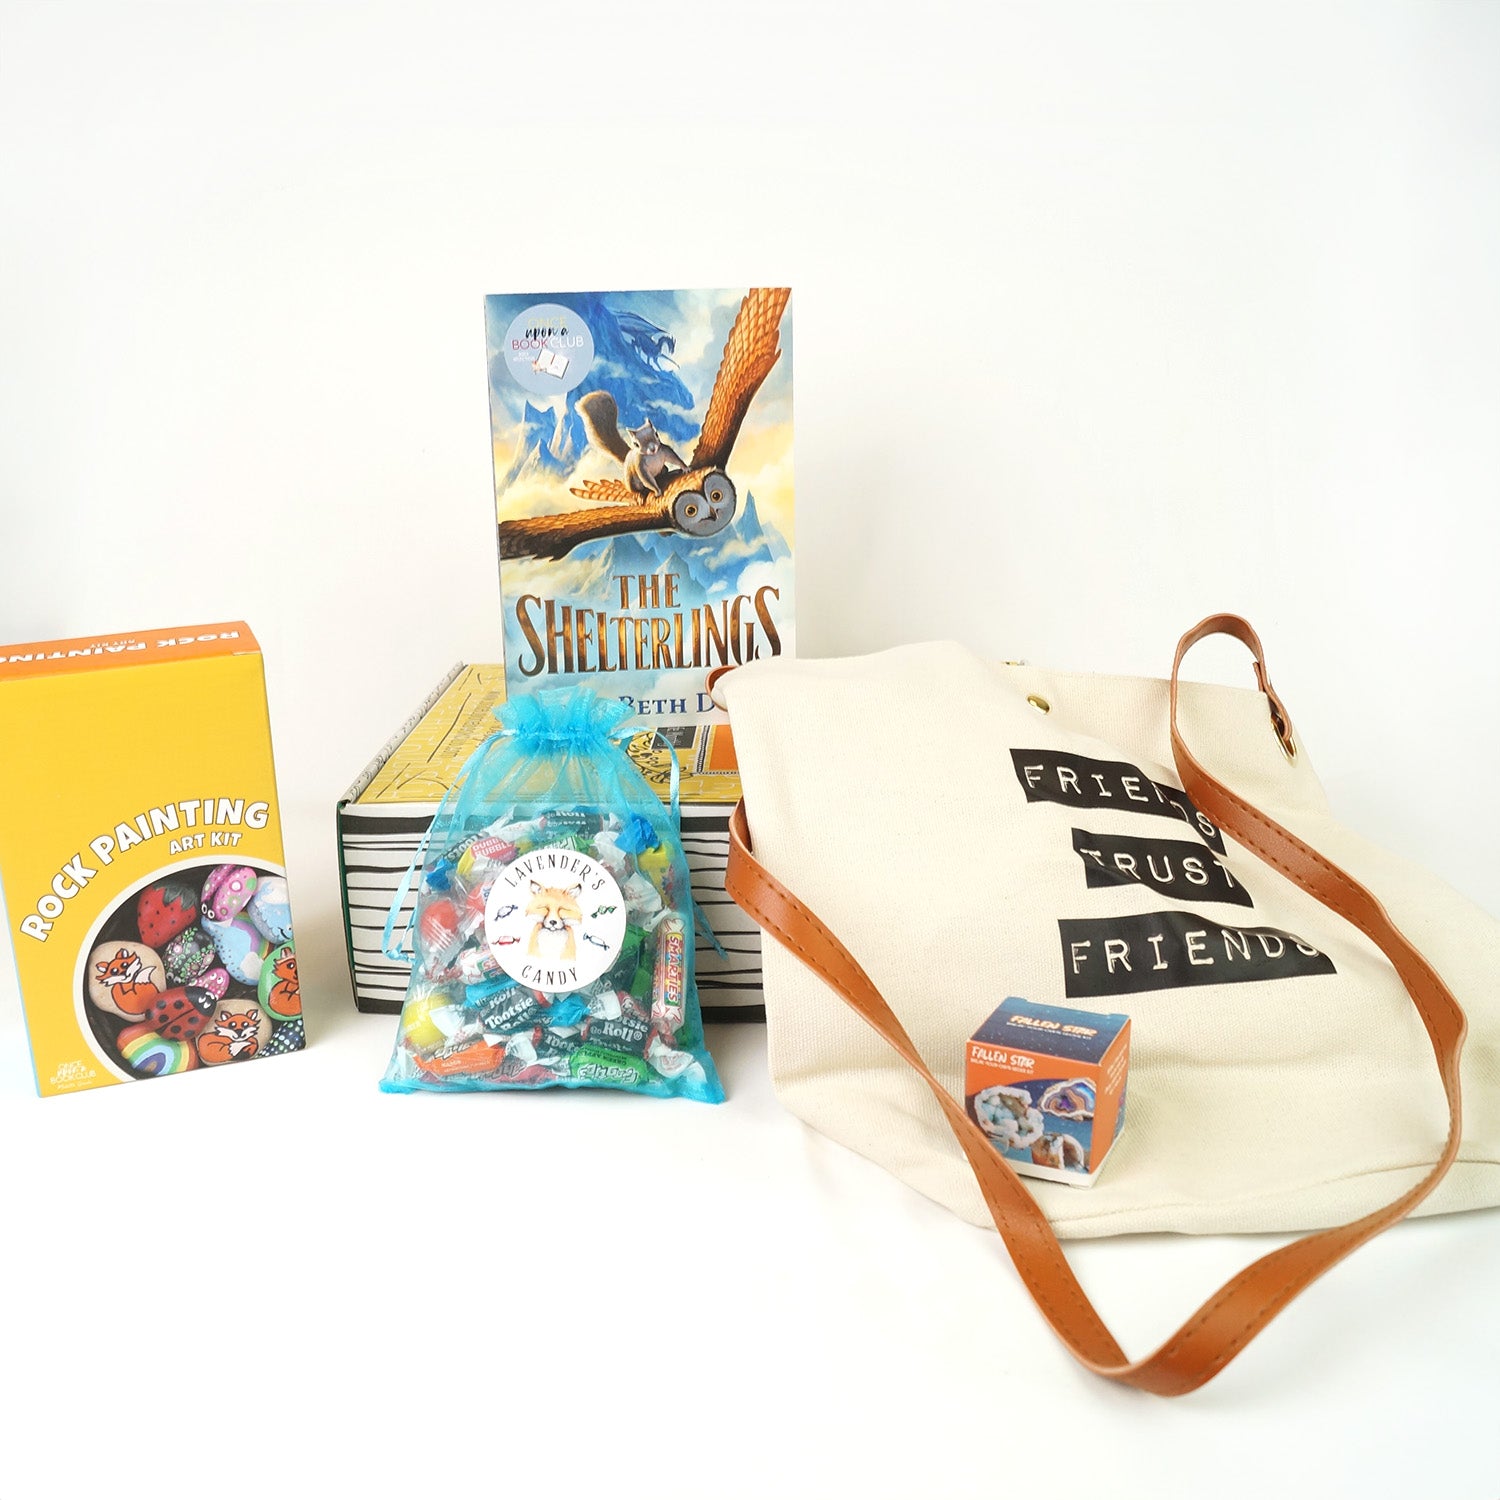 A paperback edition of The Shelterlings is on a yellow Once Upon a Book Club box. In front are a box labeled Rock Painting Kit, a teal bag filled with candy, and a white tote bag with text on the front Friends Trust Friends. On the bag is a small square box with a geode image on the front.